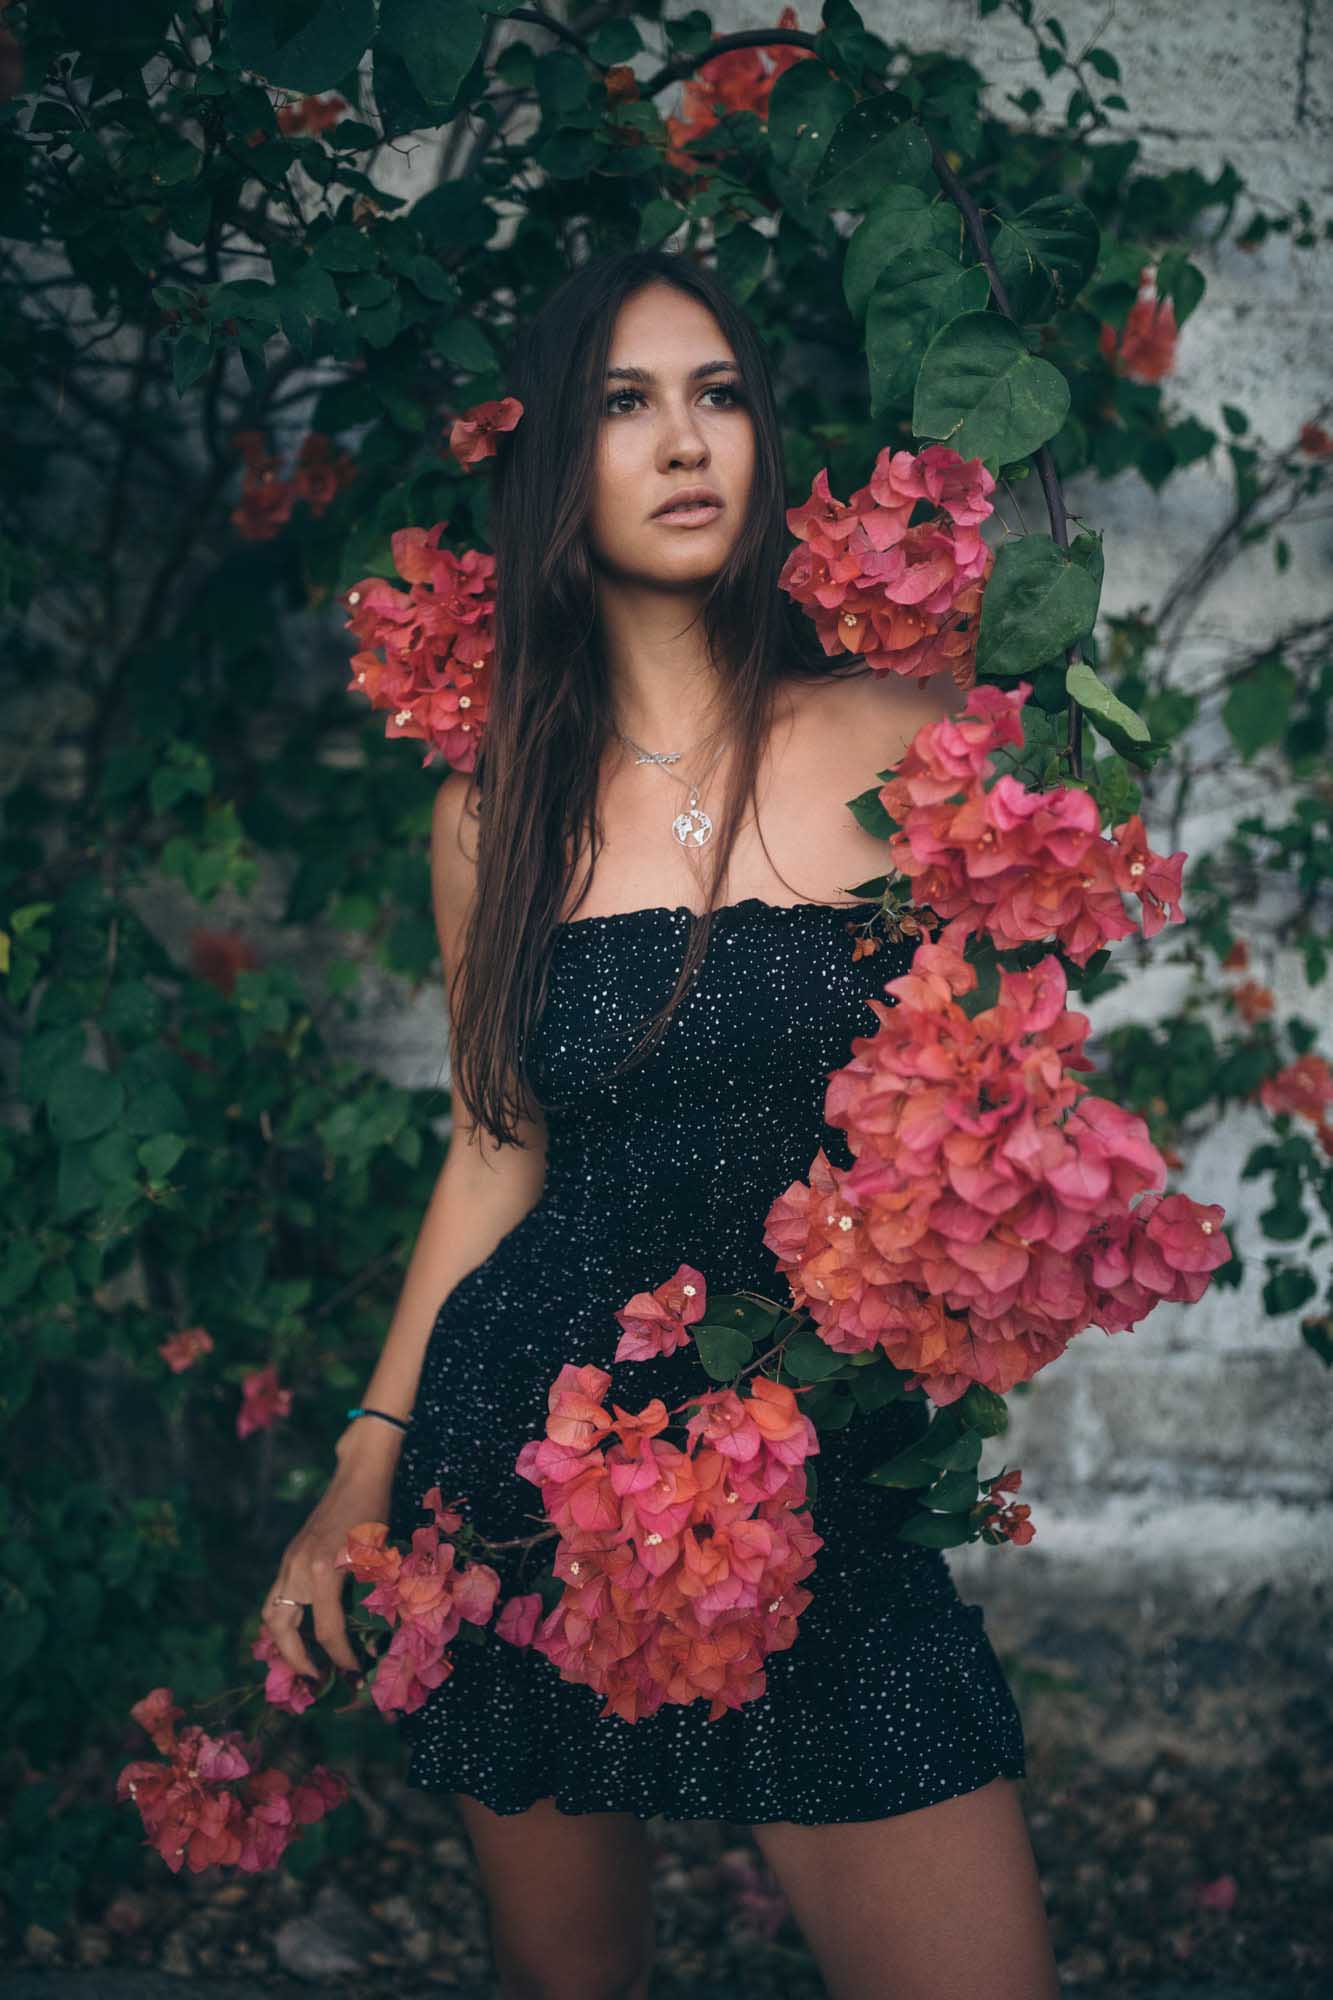 Woman in black dress poses with red flowers | Fashion Photography | Portrait | Lifestyle Photography | Canggu ,Bali, Indonesia  | Denver Photographer